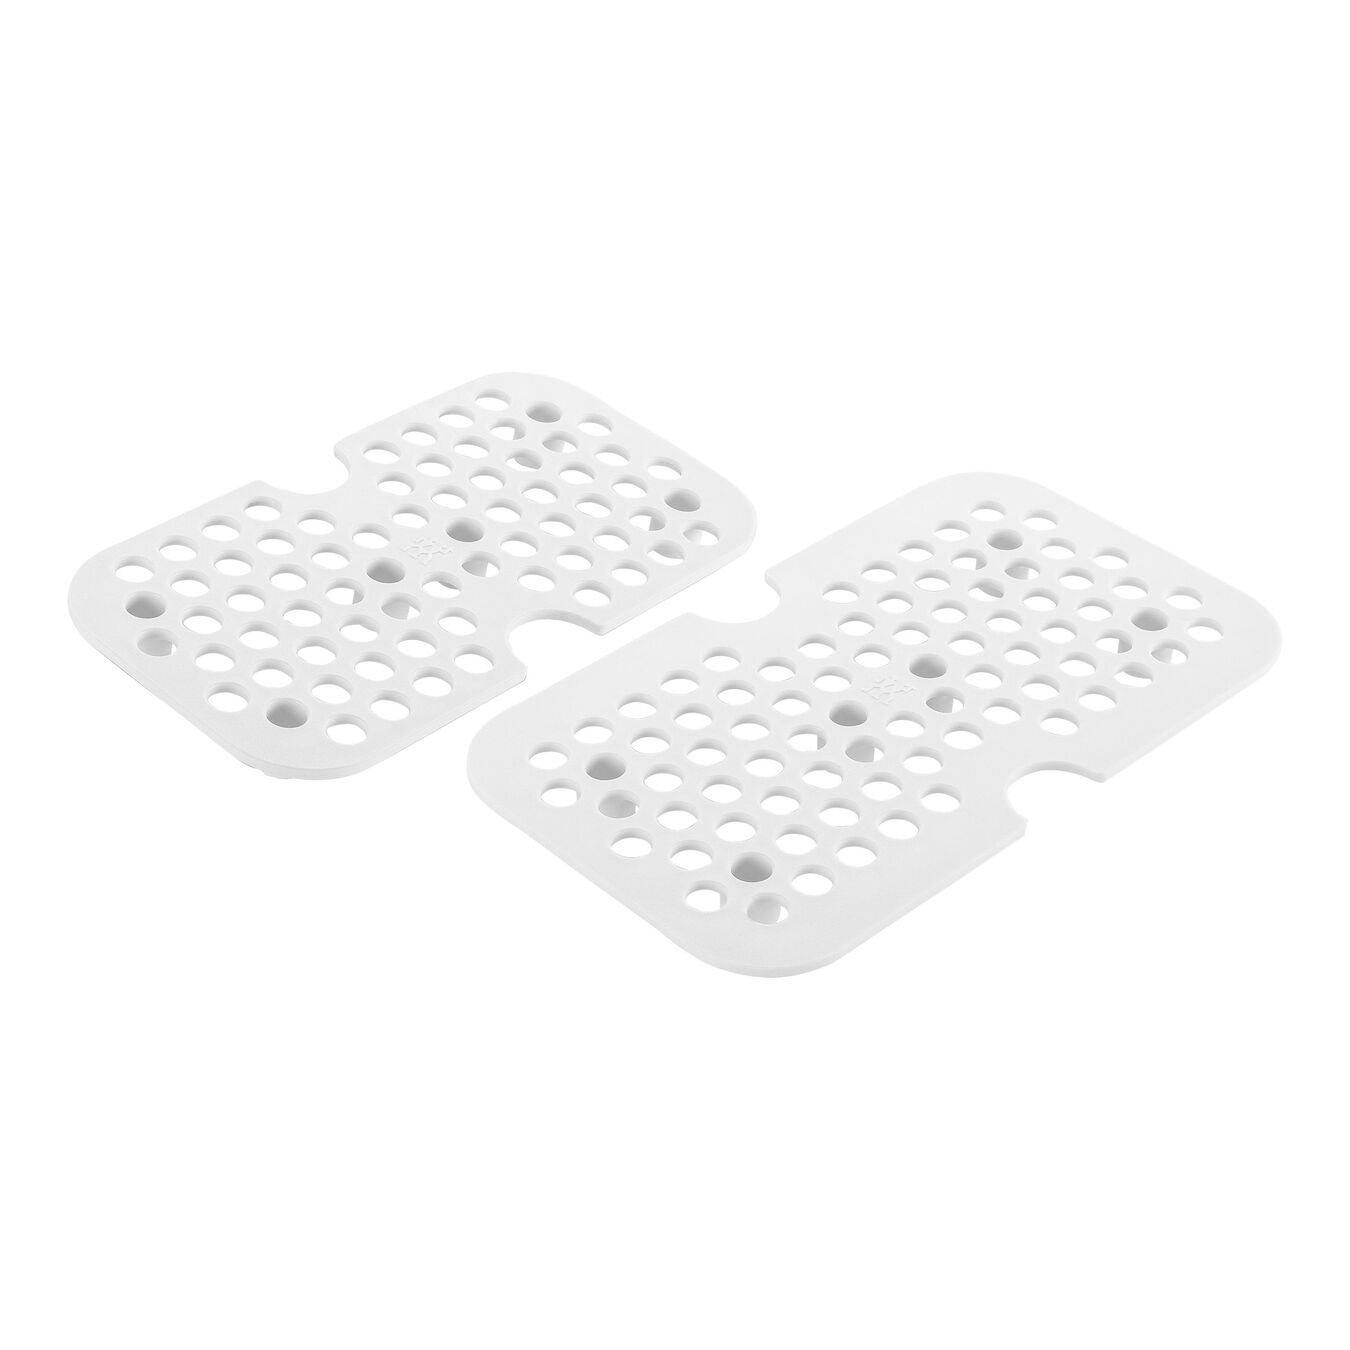 Vacuum accessory set drip tray for glass boxes, medium/large / 2-pc,,large 1